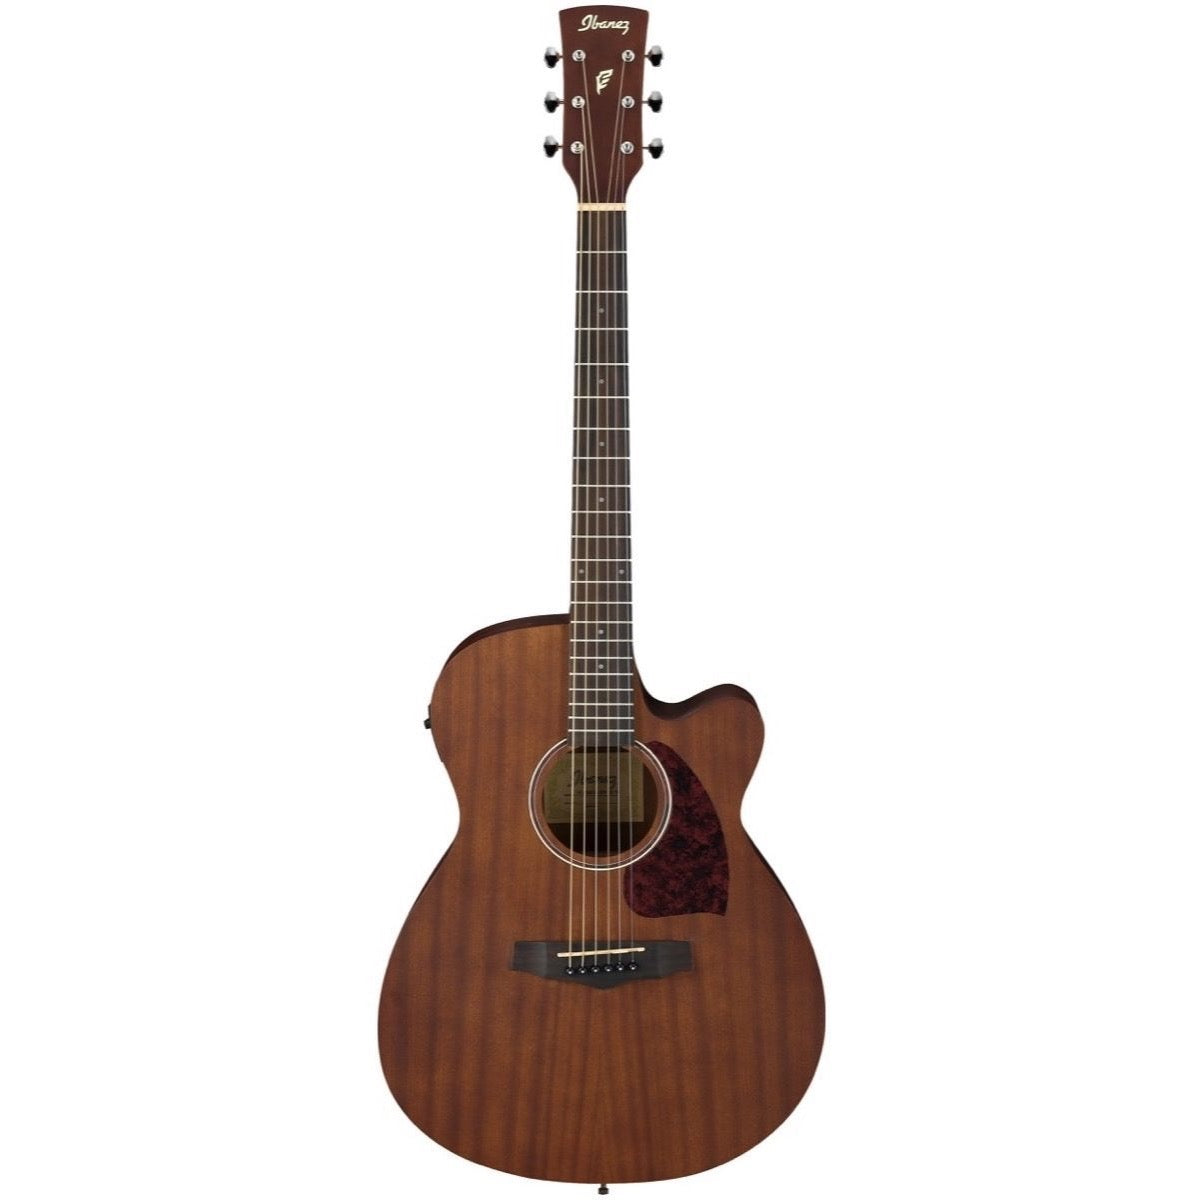 Ibanez PC12MHCE Performance Acoustic-Electric Guitar, Open Pore Natural